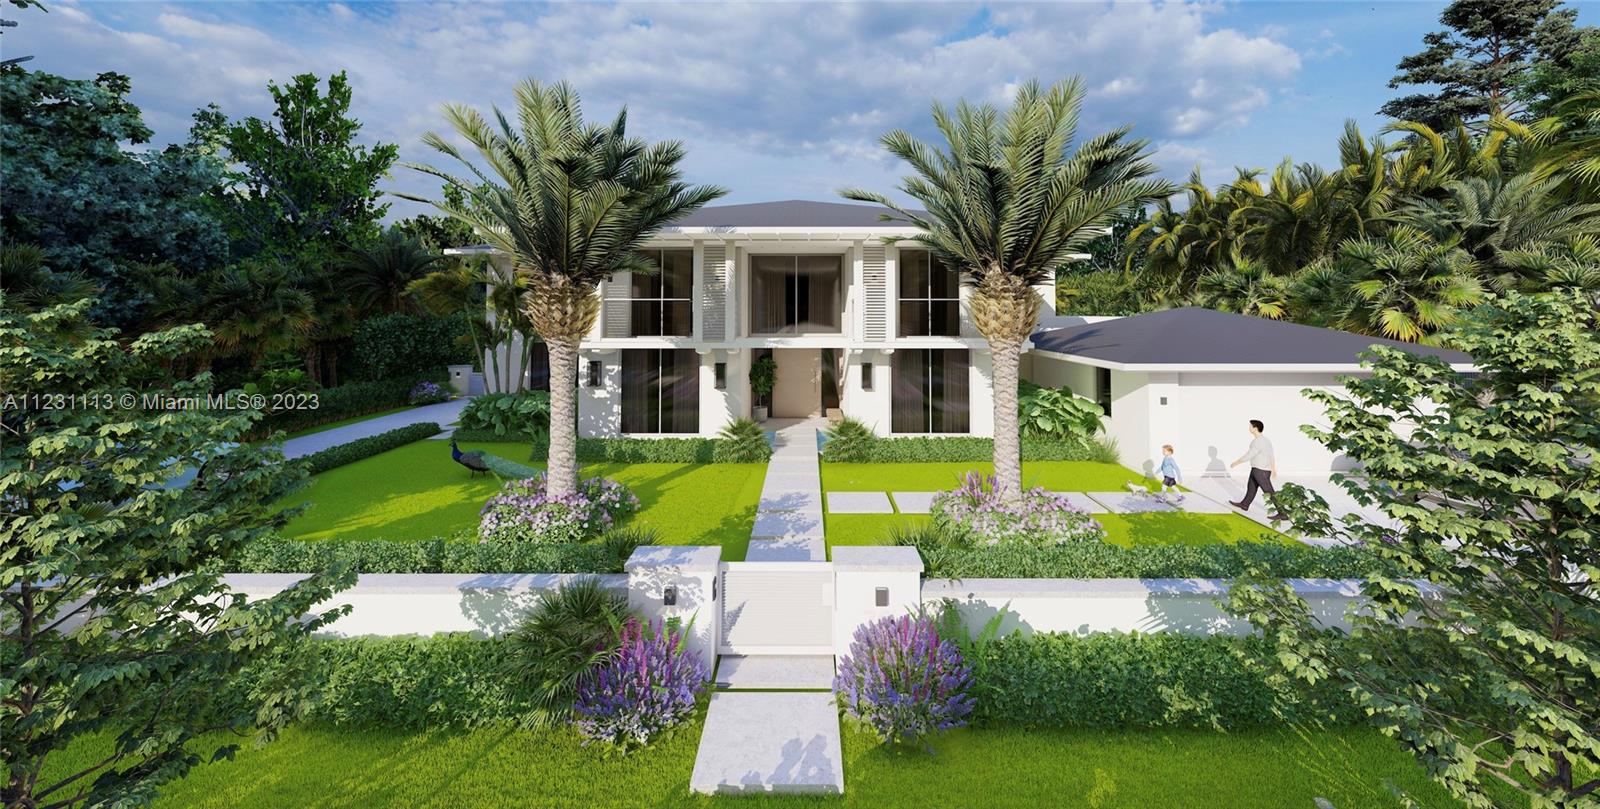 **New Construction** Completion Summer 2023. 6,100 ft of Living/ 7,200 ft TOTAL** Custom built home designed by awarded architects Balli Trautman & interior finishes by Cozy Salazar Interiors. Meticulously designed, truly one of a kind residence in the heart of South Miami. Located in sought after Mango Terrace just 8 blocks north of Pinecrest, 1 minute from downtown SoMi and 5 minutes from Coral Gables. Trimless lighting, 48x48 large format porcelain tile and wide plank oak wood floors, natural coral stone exterior detailing. True Chef's kitchen featuring Wolf, Miele and Subzero appliances with 5ft Galley Sink. Spa Master bath with waterworks plumbing fixtures & floor to ceiling marble. Smart home automation/ efficient w/ solar panels and energy-saving upgrades. Your perfect home awaits.